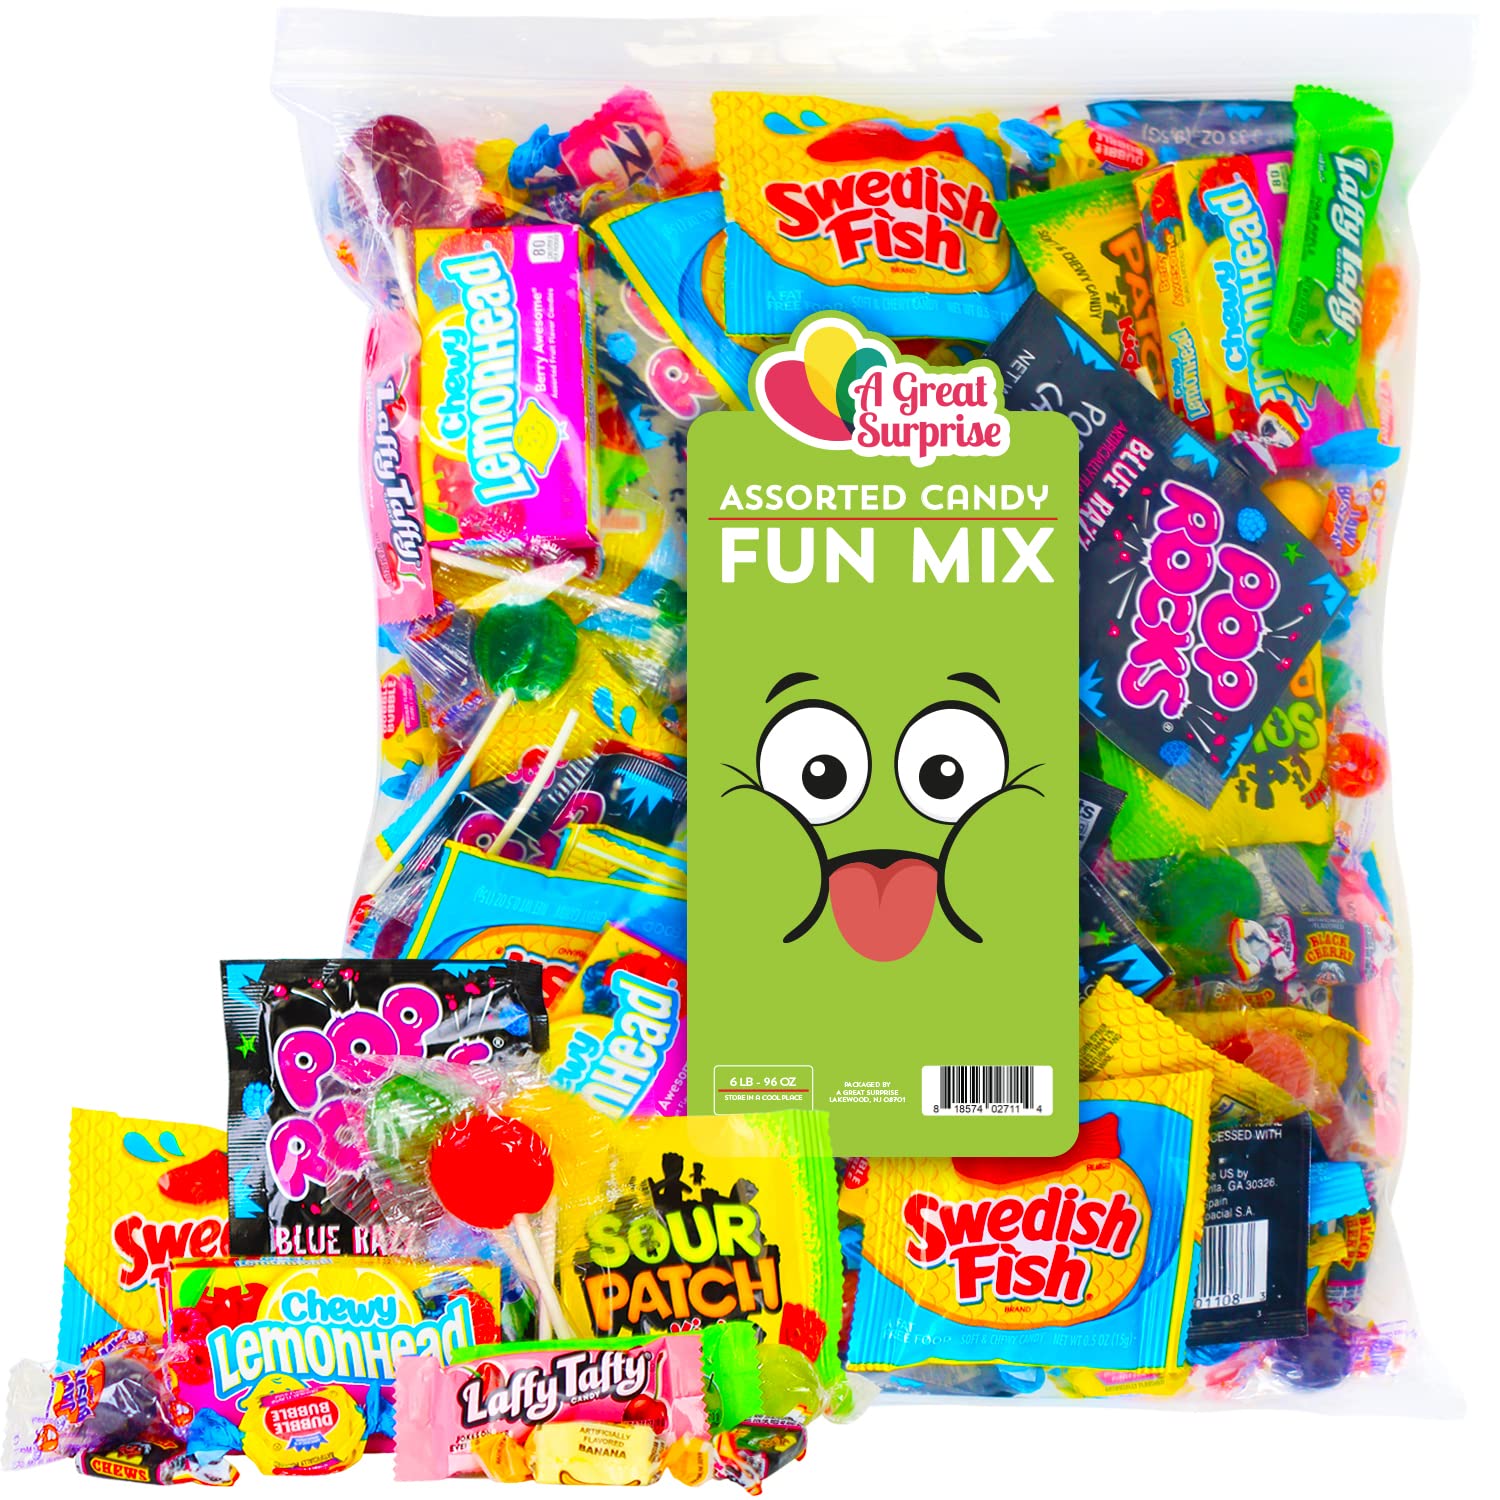 Buy Chocolate Candy Mix - 4 LB Bulk Assortment - Fun Size Chocolate Candy  Bars - Indivudally Wrapped for Pinata, Parade, Goody Bags and More